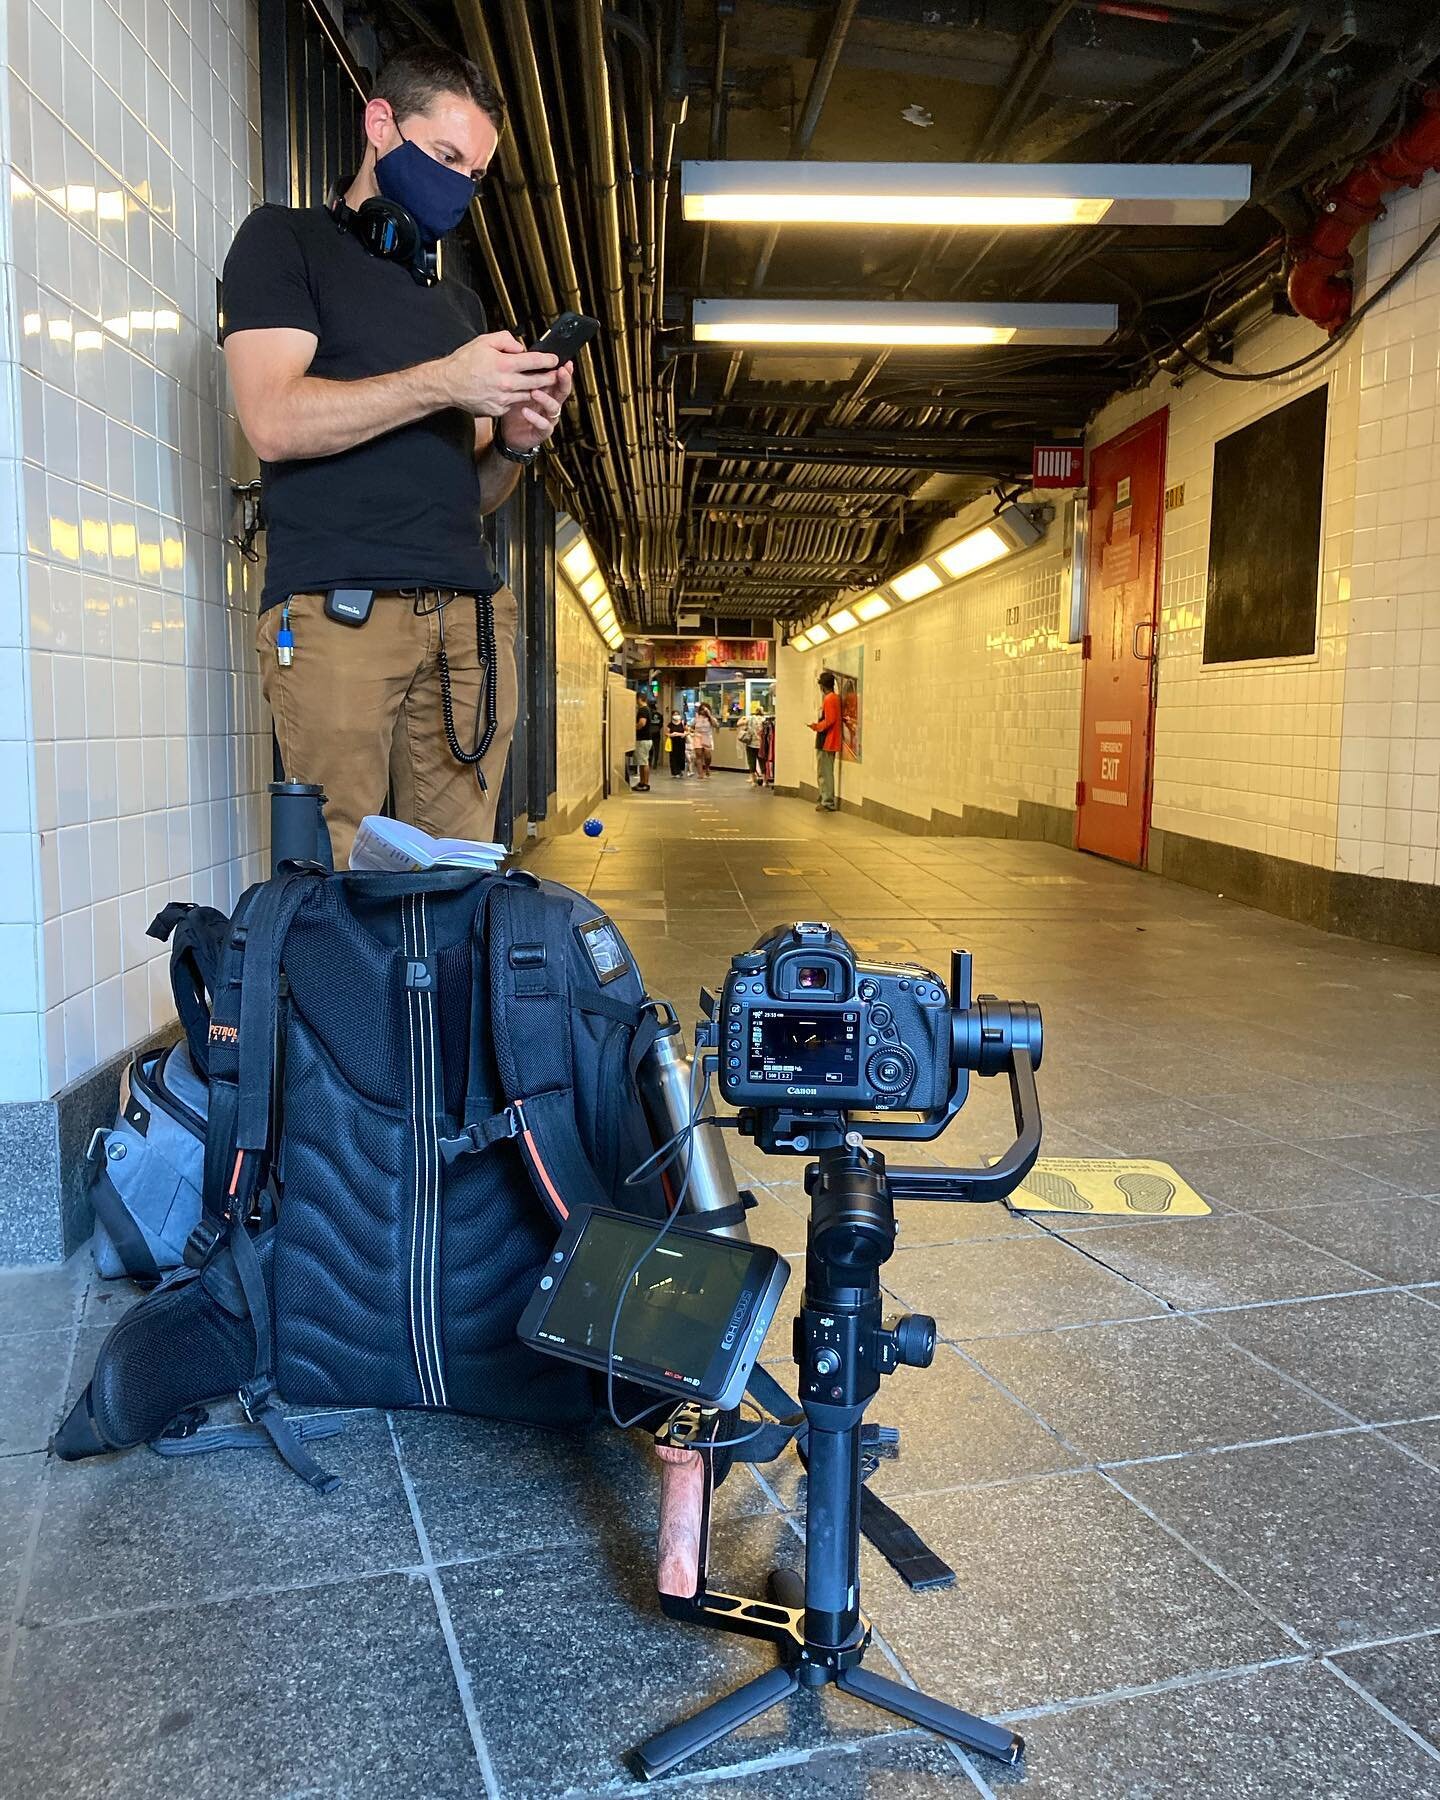 Shoot day 1 of 3 this week. First stop, Harlem. Small crew and lightweight gear for mobility around the subway and streets. Let us know how we can help capture the content your business needs!

#sefcikprod #canon5dmarkiv #ronins #runandgun #njvideogr